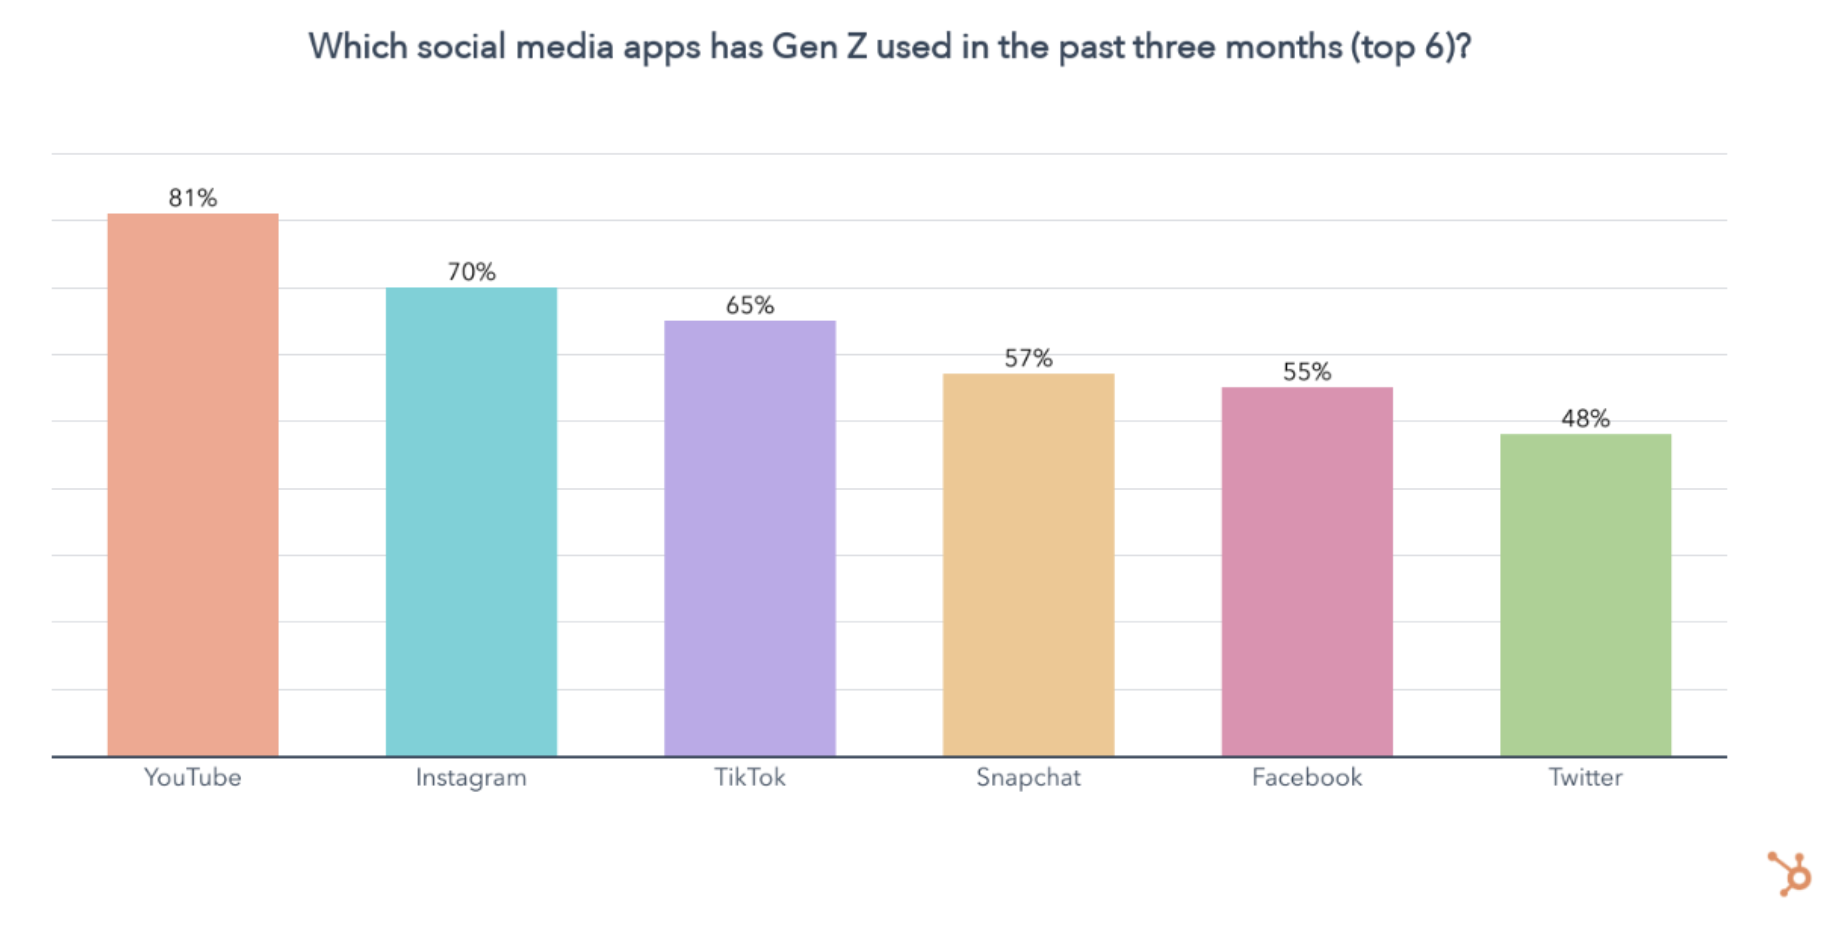 Graph showing YouTube as the social media app used most by Gen Z.